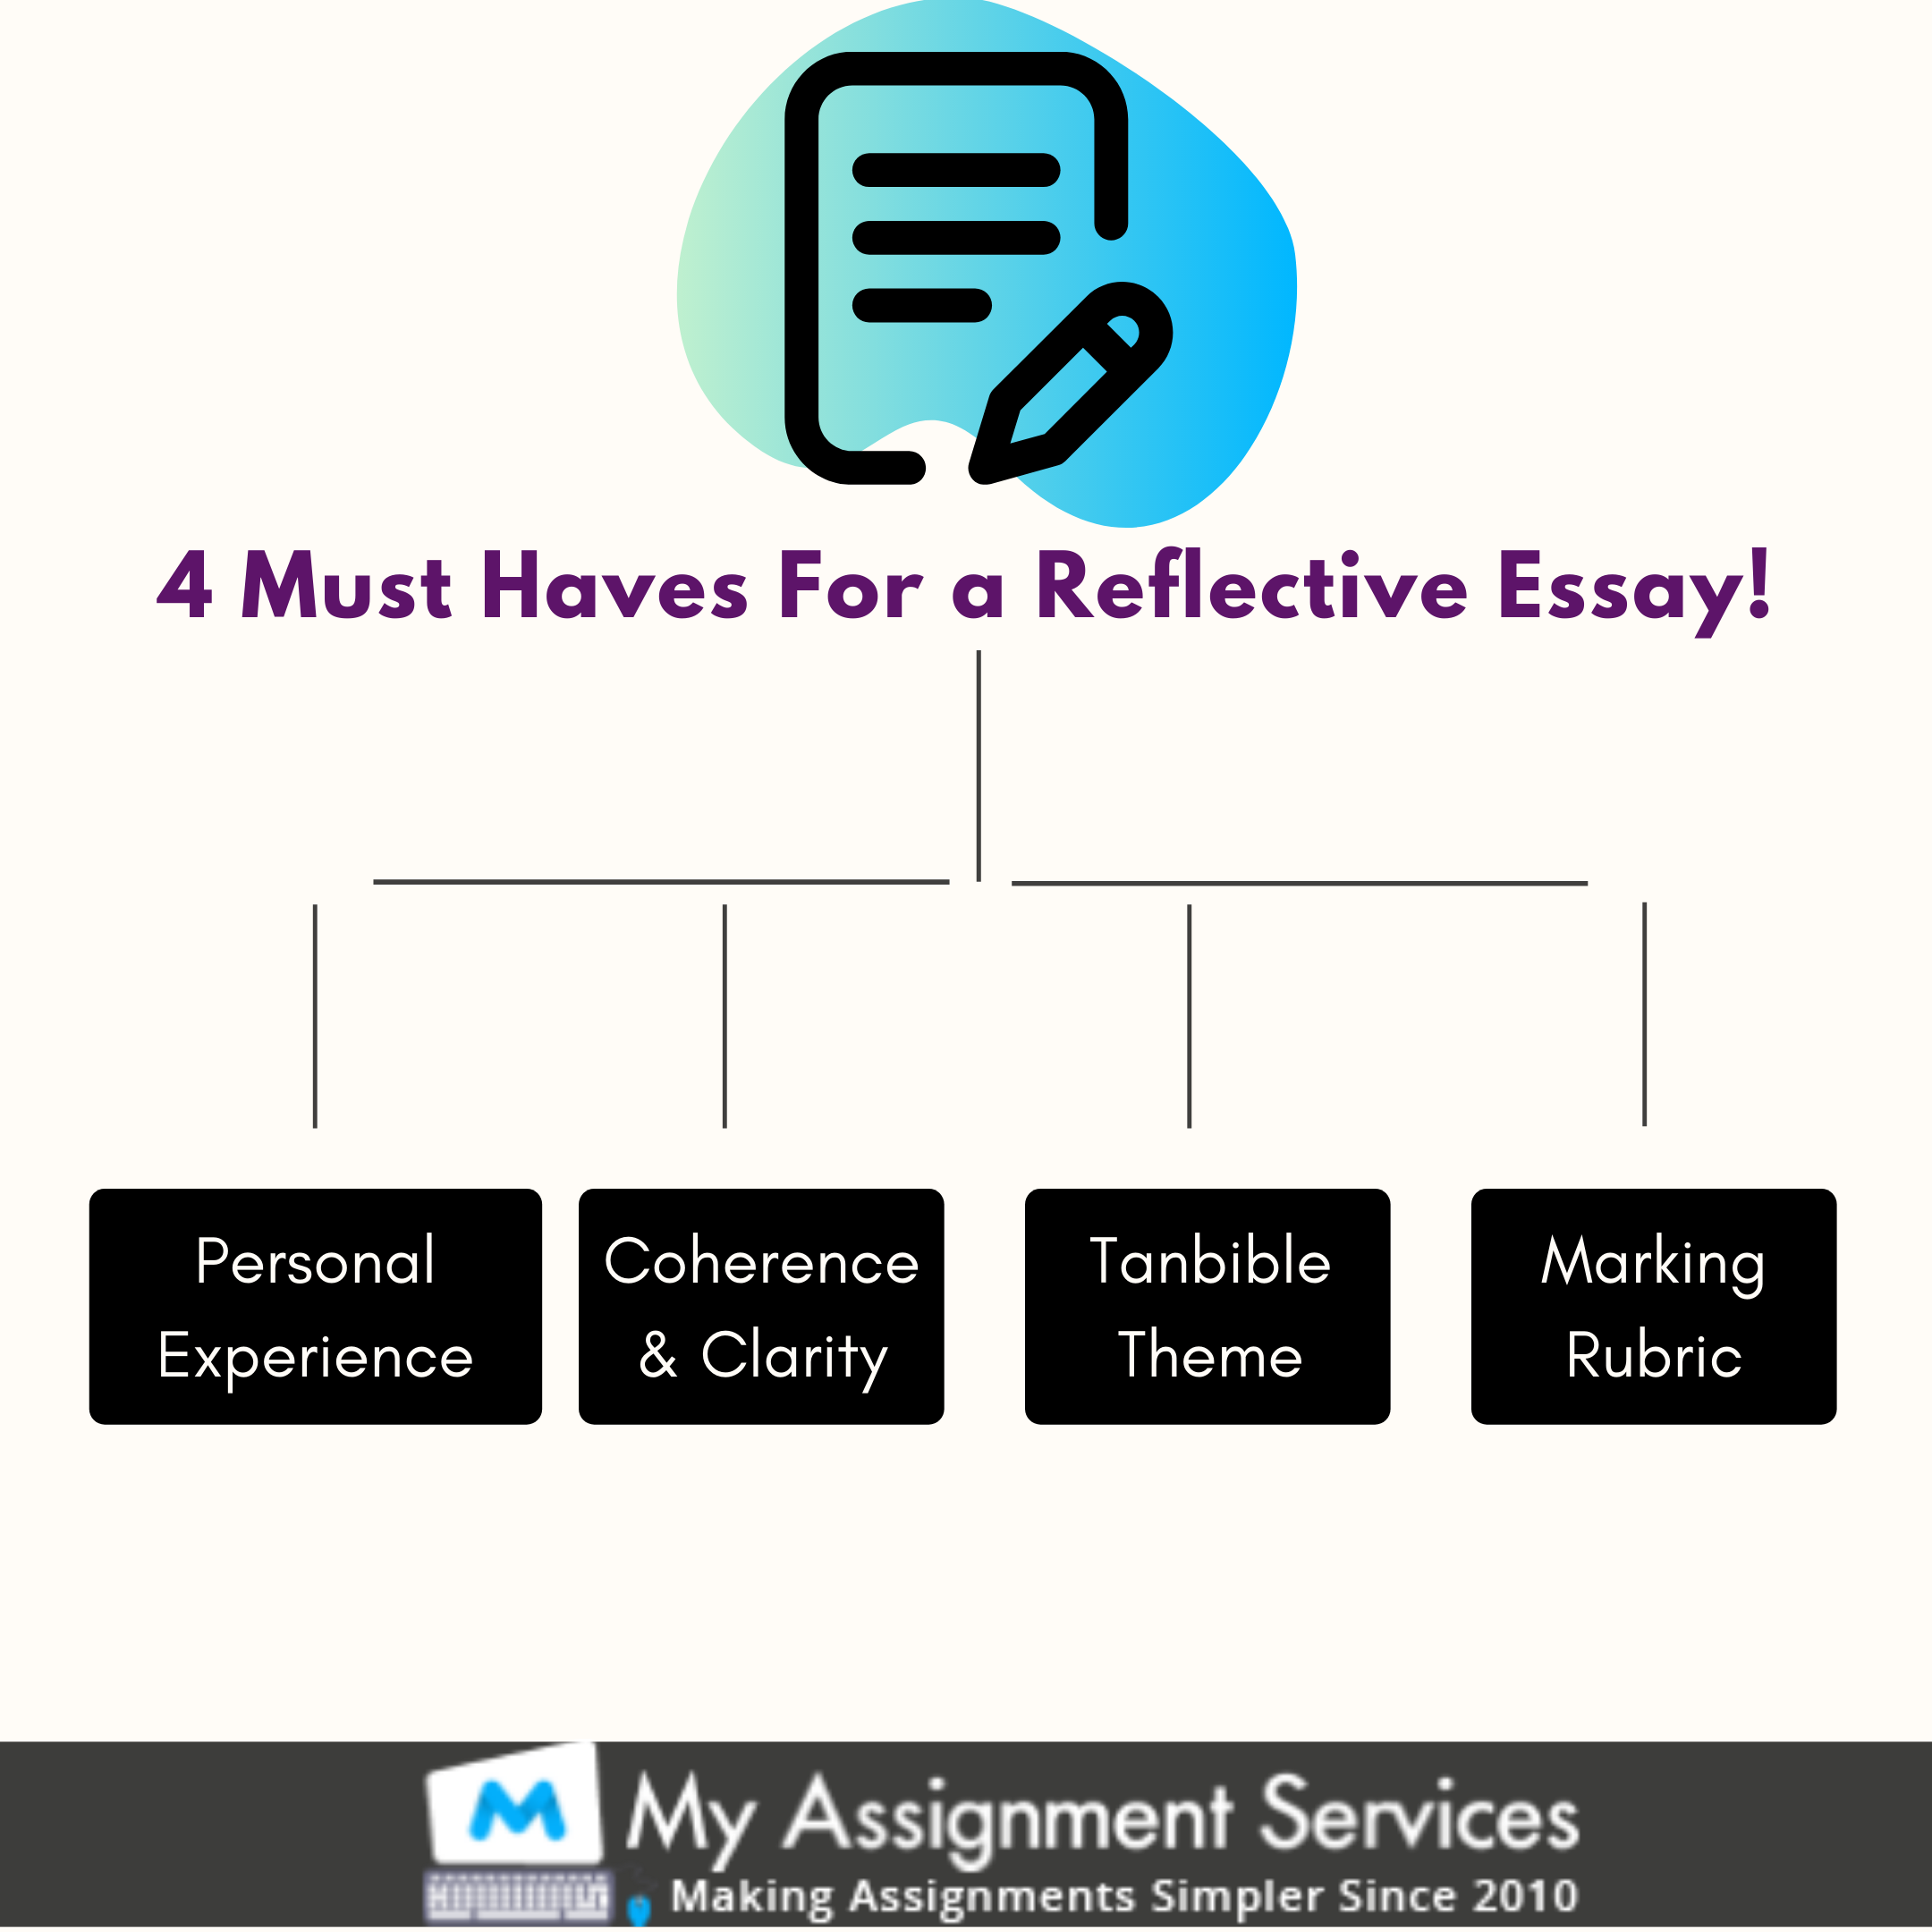 4 Must Haves For a Reflective Essay